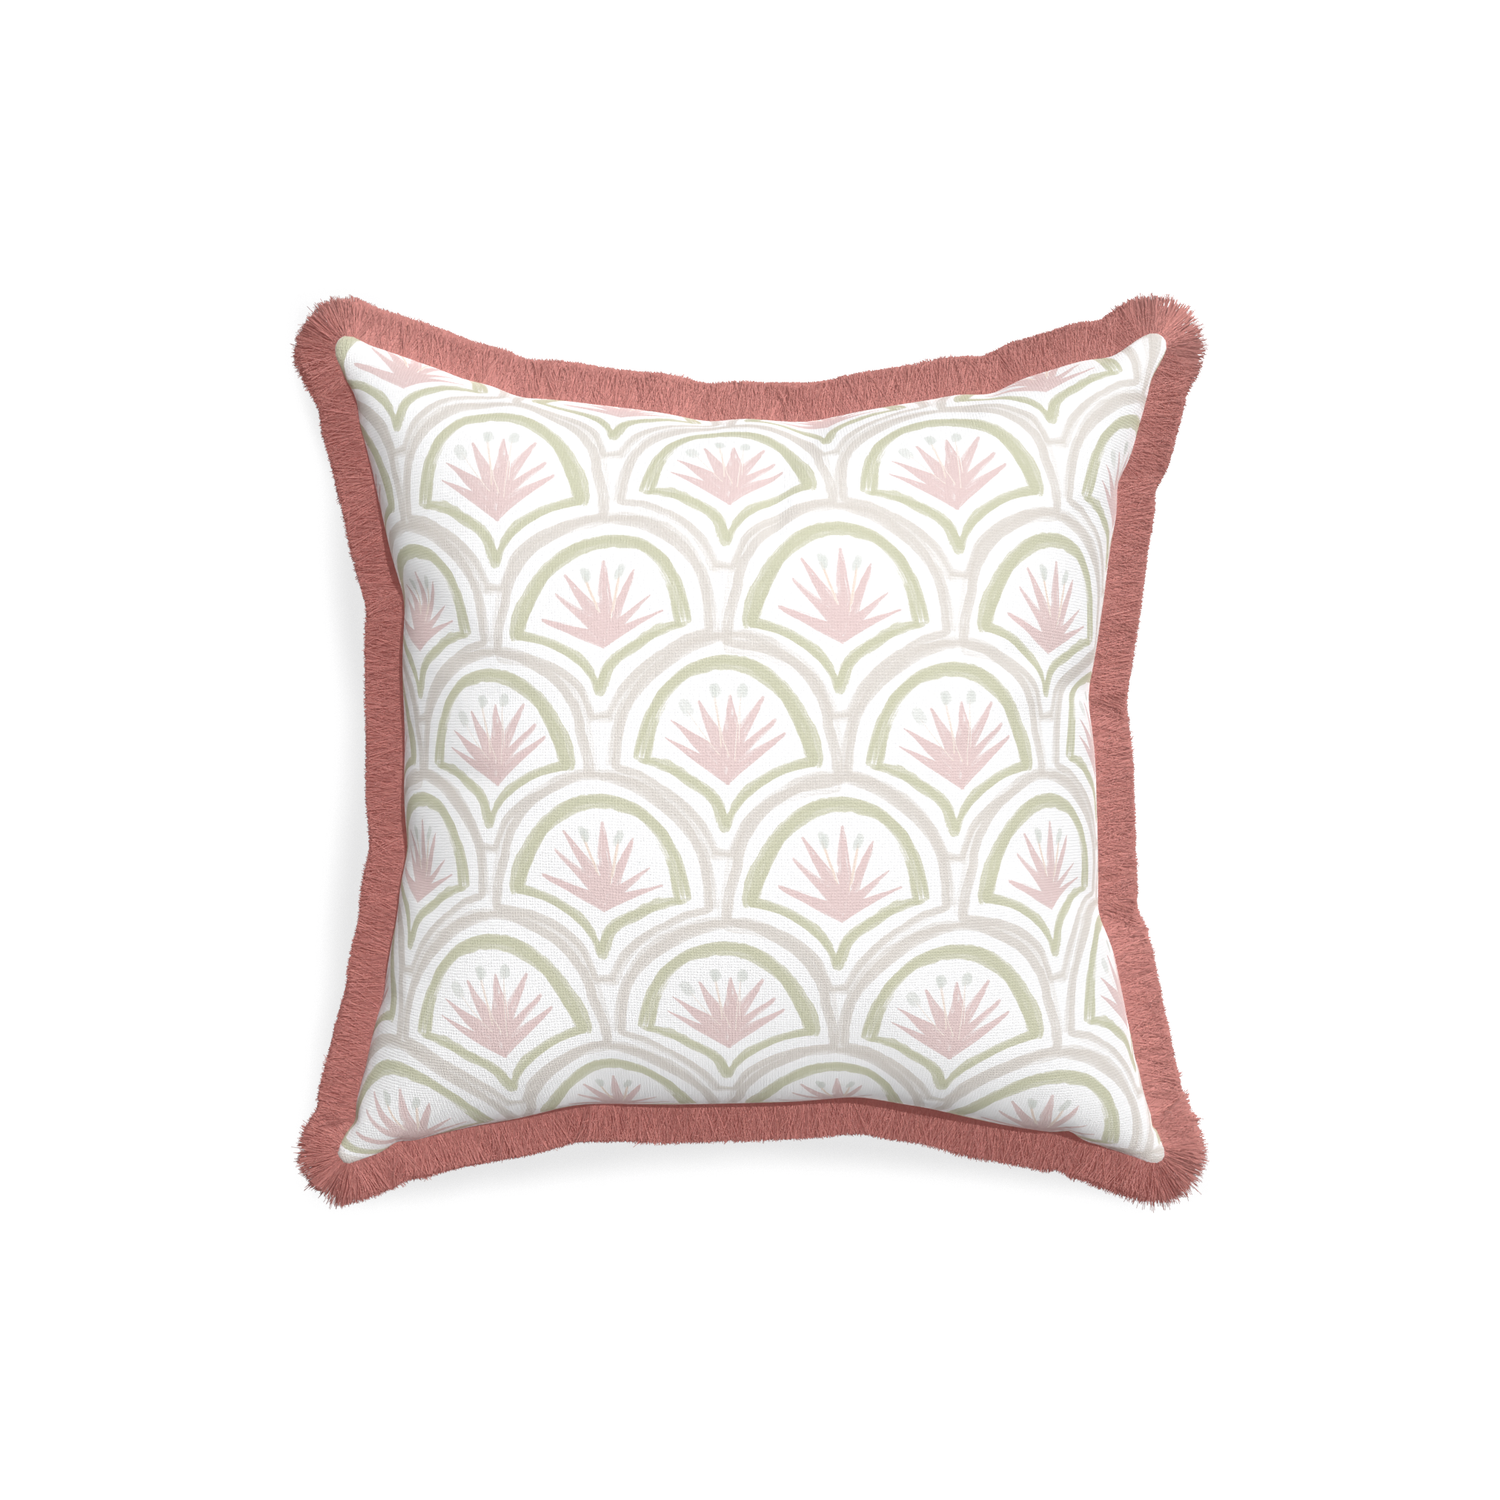 18-square thatcher rose custom pink & green palmpillow with d fringe on white background